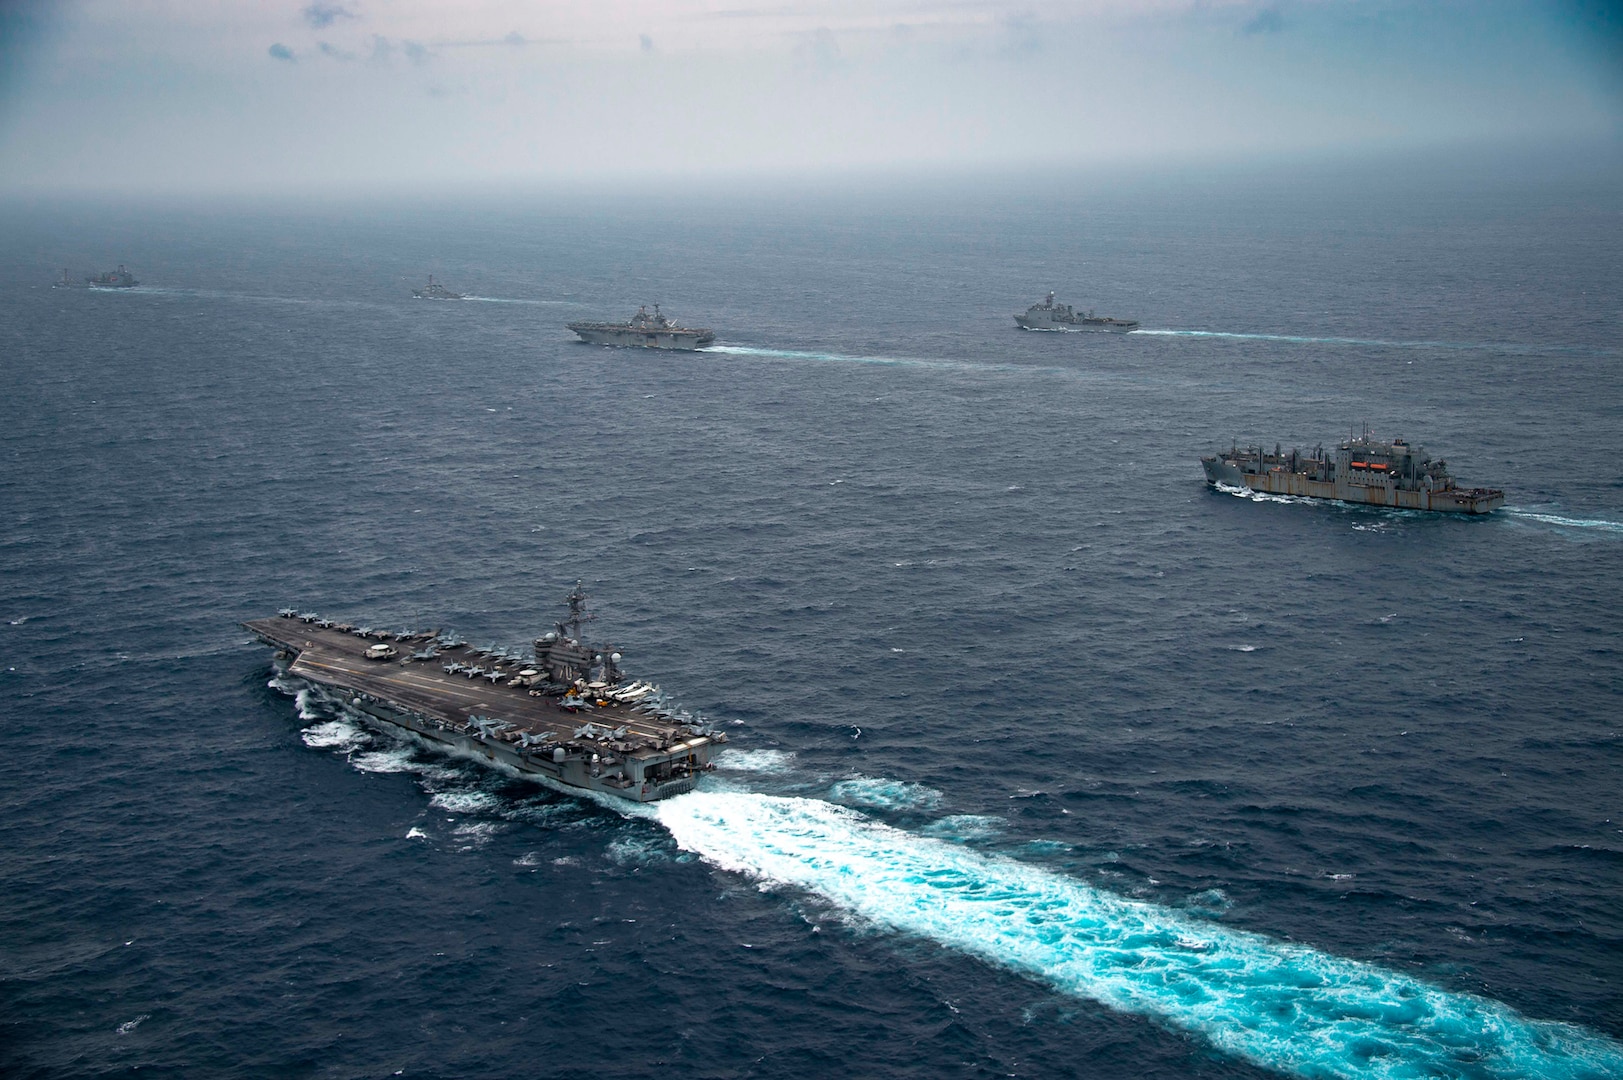 Carl Vinson Carrier Strike Group and Essex Amphibious Ready Group Wrap Up Joint Operations in the South China Sea